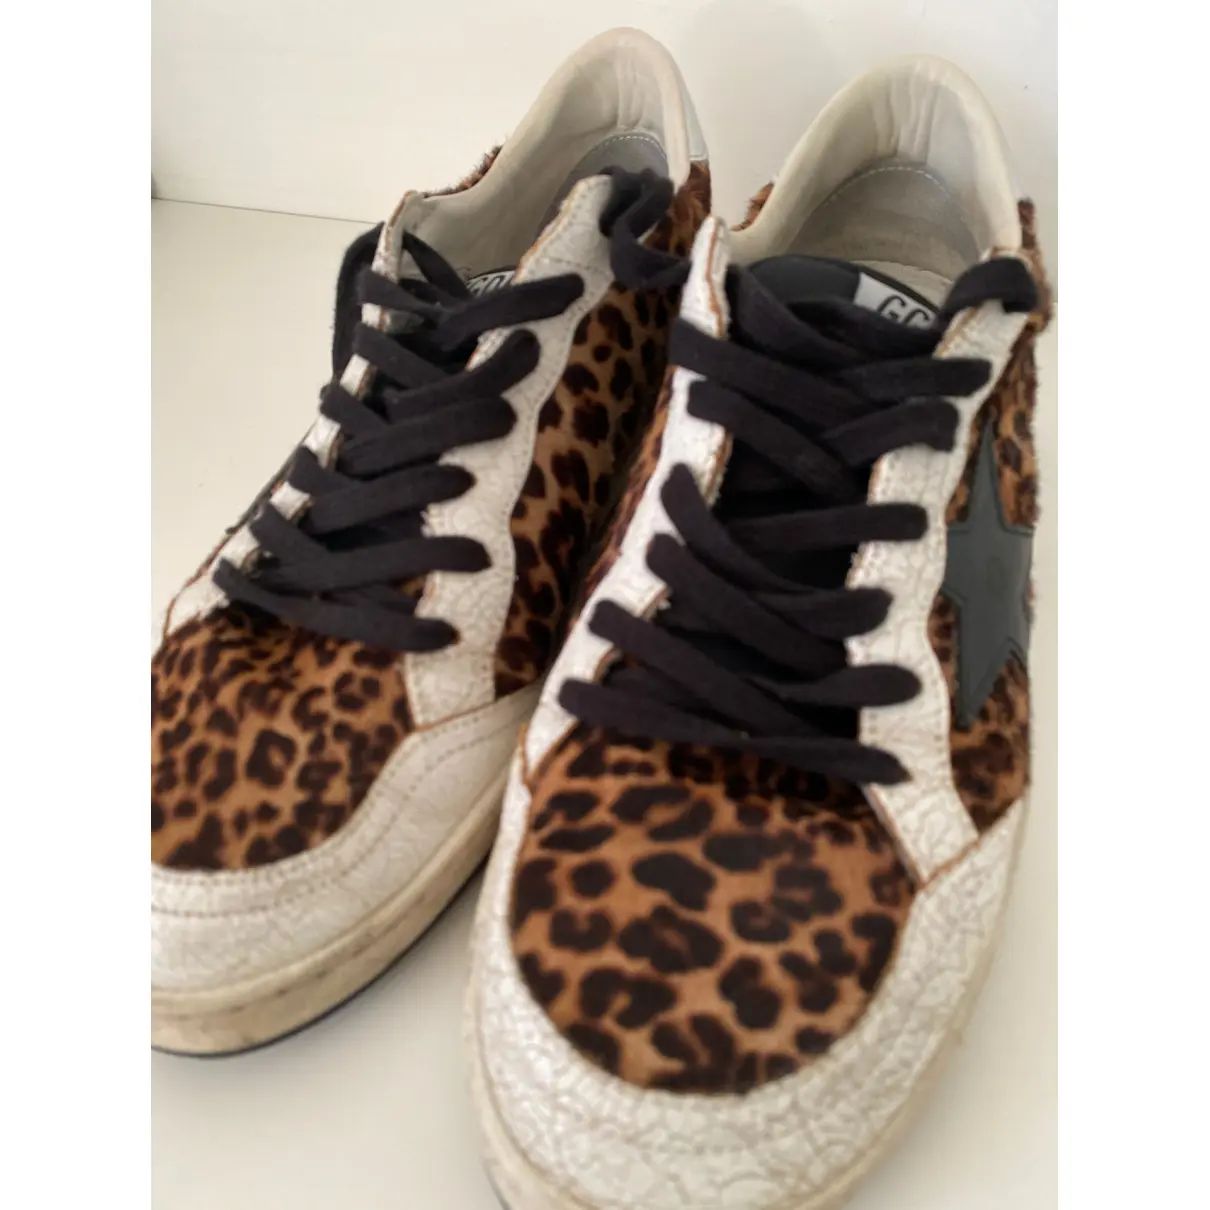 Buy Golden Goose Ball Star pony-style calfskin trainers online